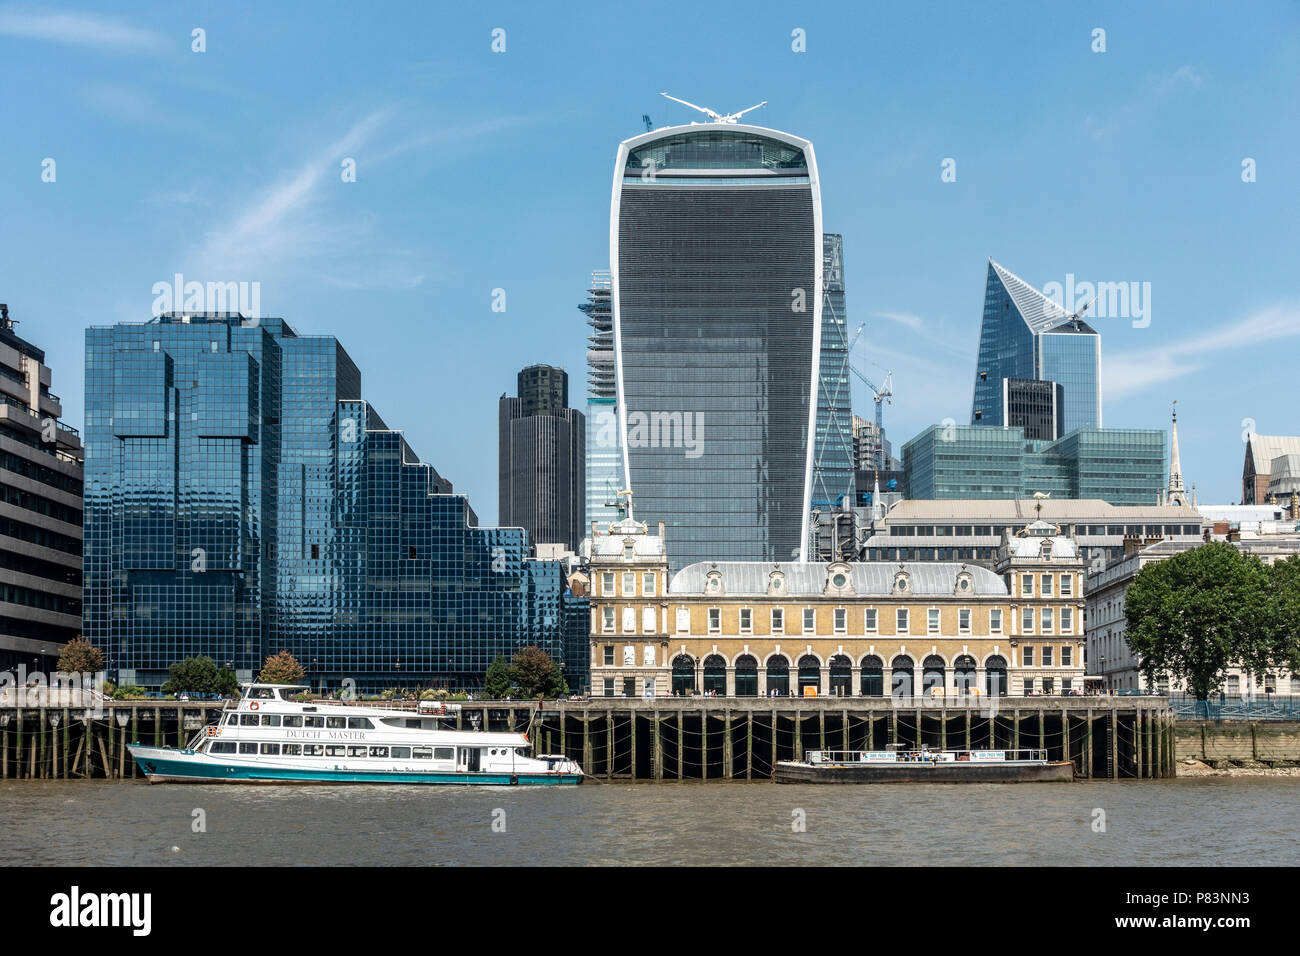 London Architecture Old & New: North Bank River Thames. The Walkie talkie, The Scalpel, The Cheesegrater, old Billingsgate fish market Tower 42. Stock Photo